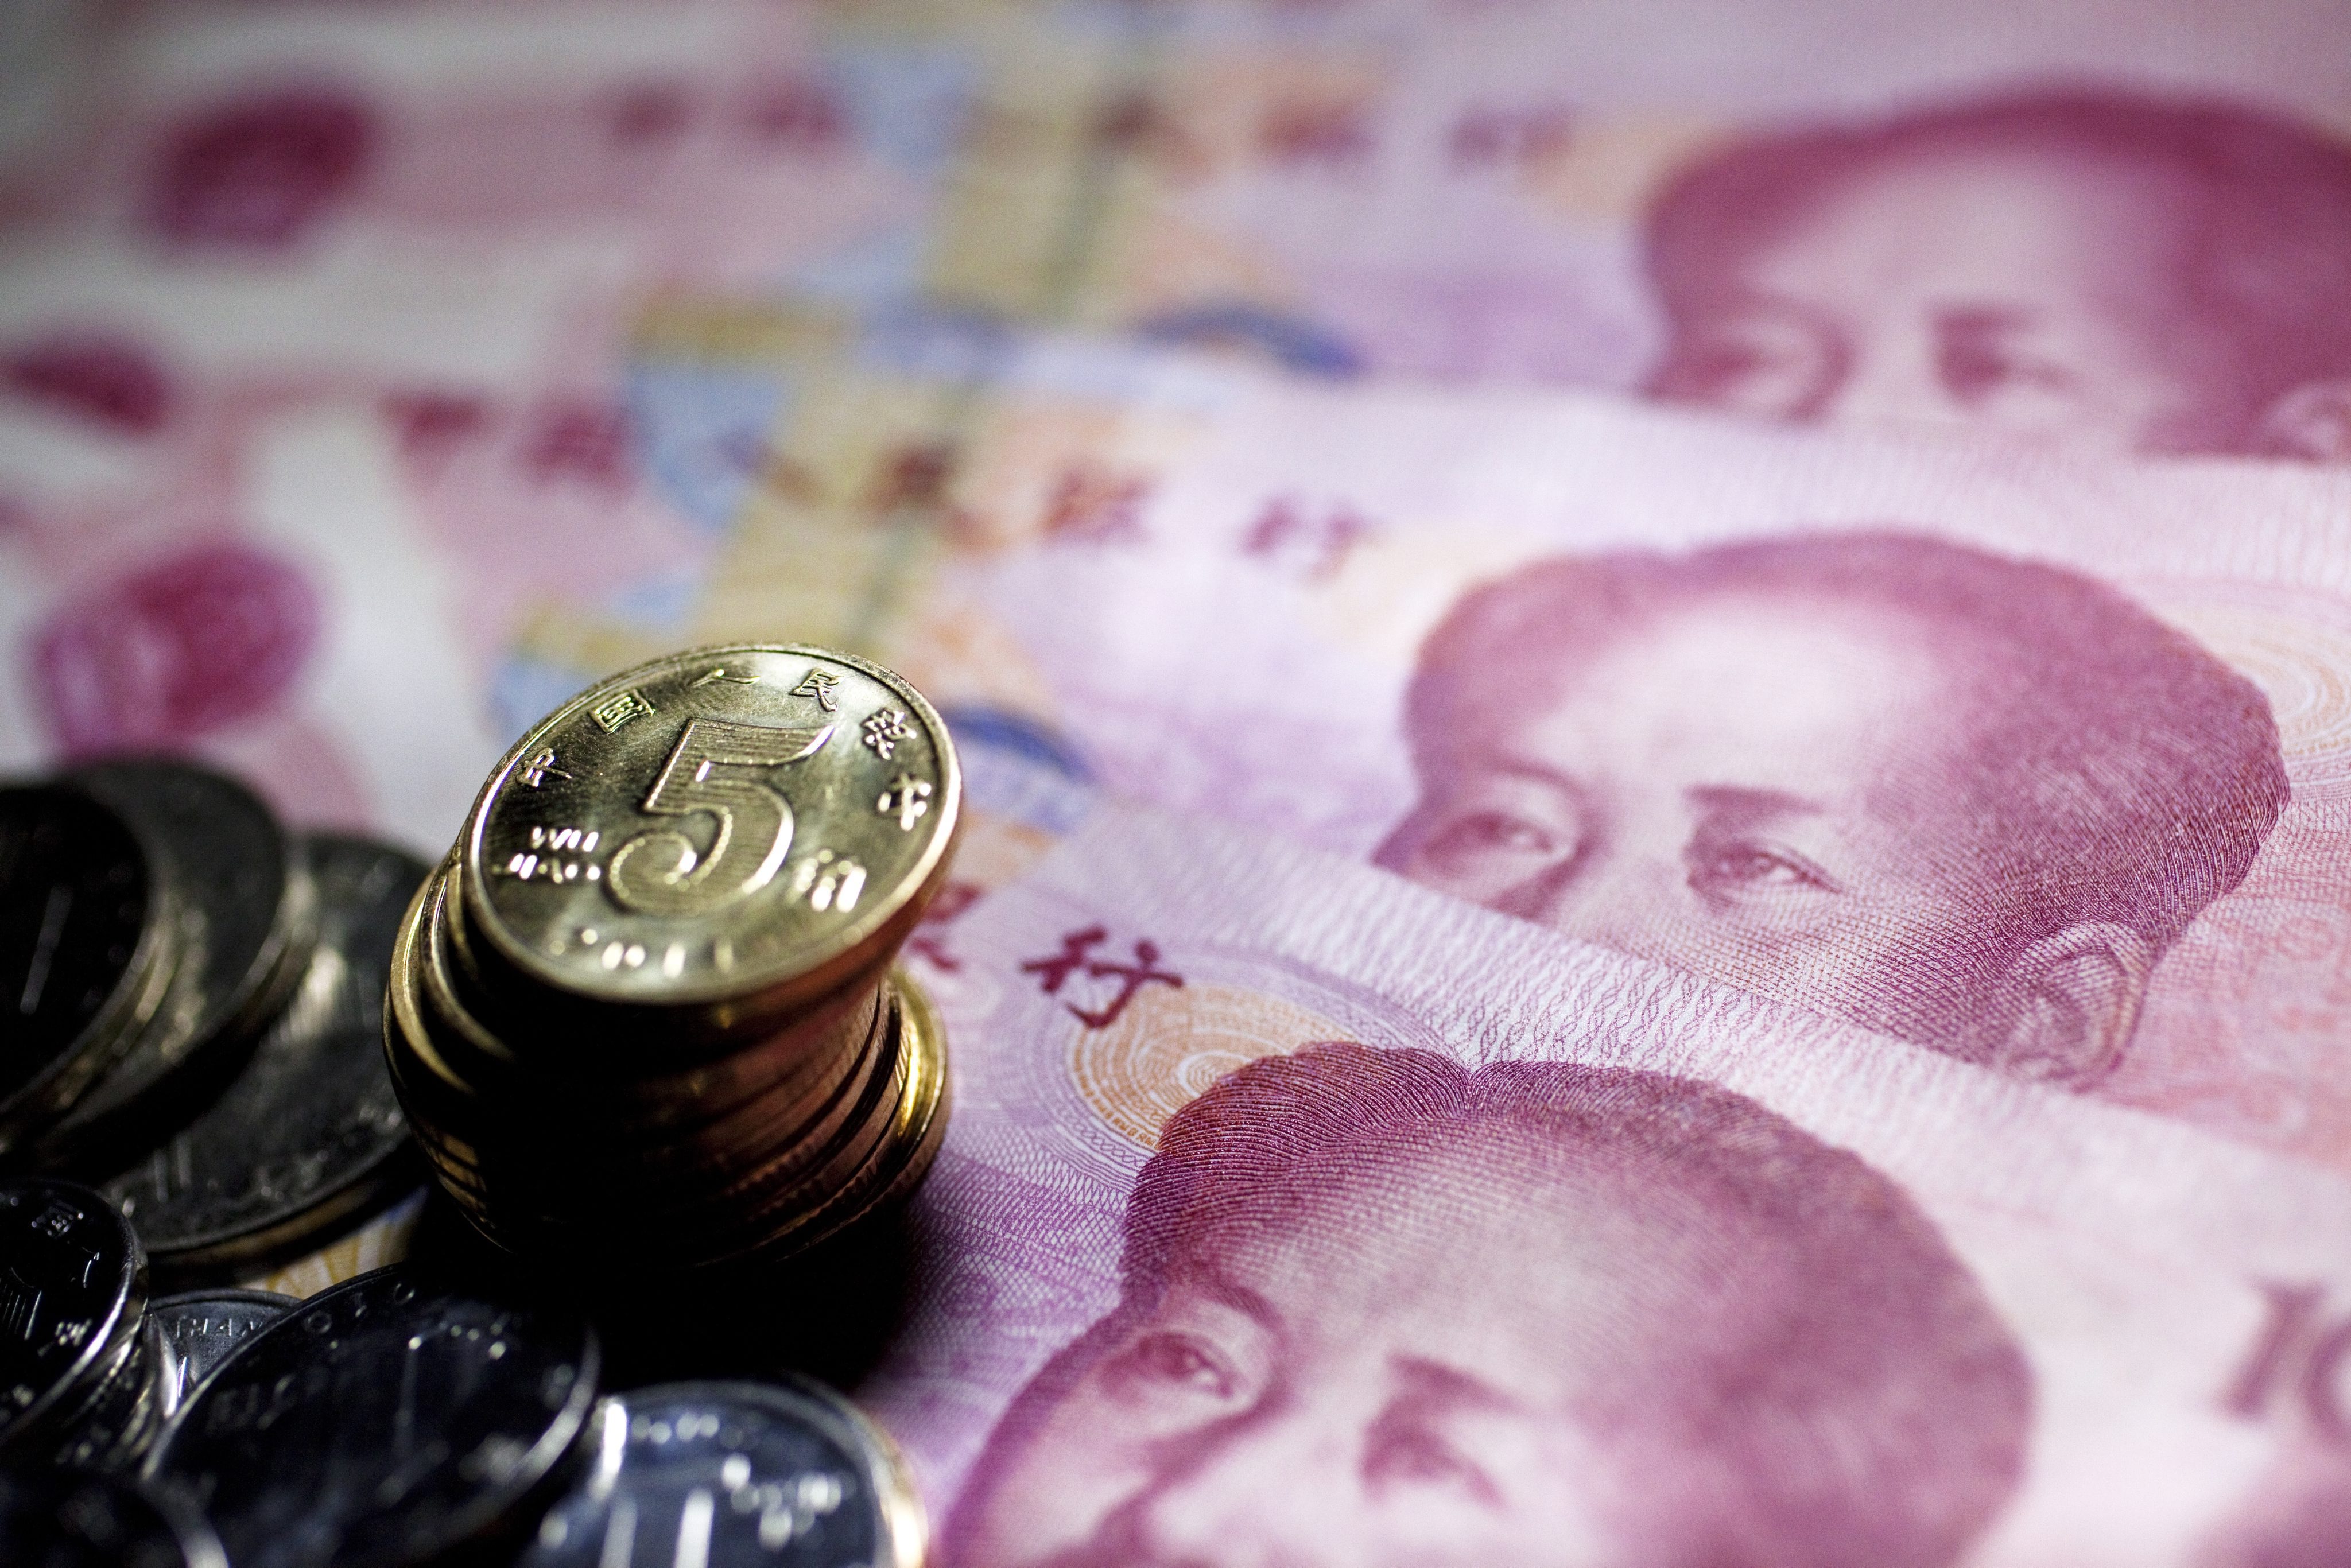 Chinese yuan bank notes and coins as the currency weakened against the dollar after US Fed chair Janet Yellen said interest rate increases are likely later in the year. Photo: EPA